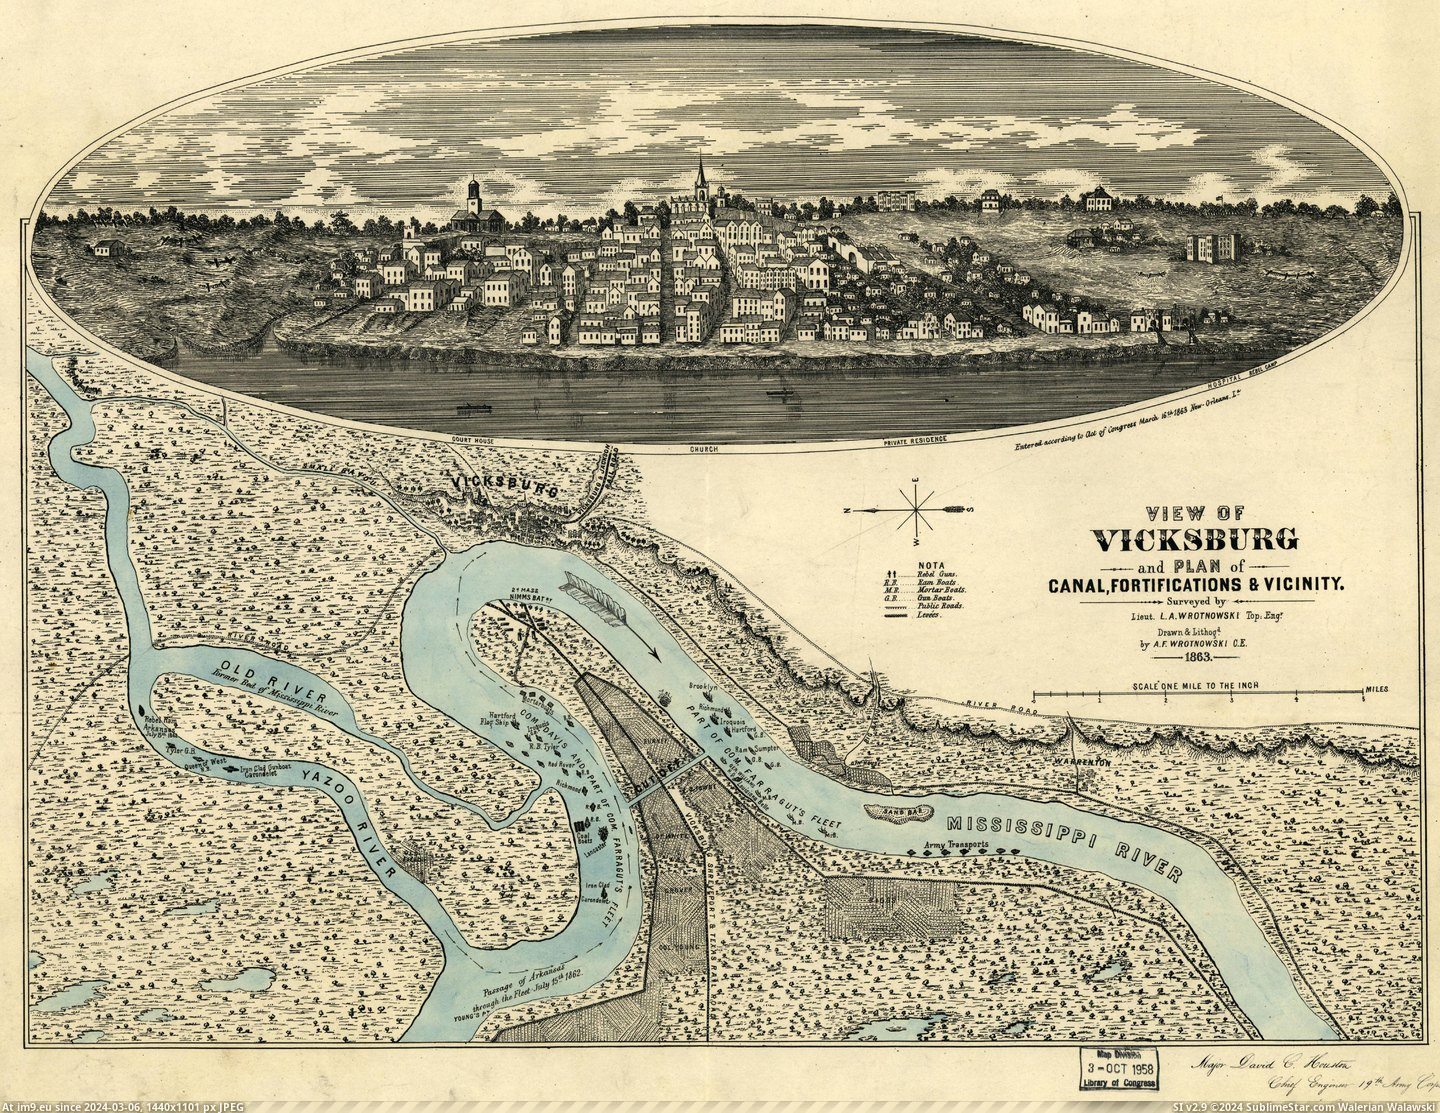 #Plan #Vicinity #Canal [Mapporn] View of Vicksburg and plan of the canal, fortifications and vicinity, L.A. Wrotnowski, 1863. [6552x5024] Pic. (Image of album My r/MAPS favs))